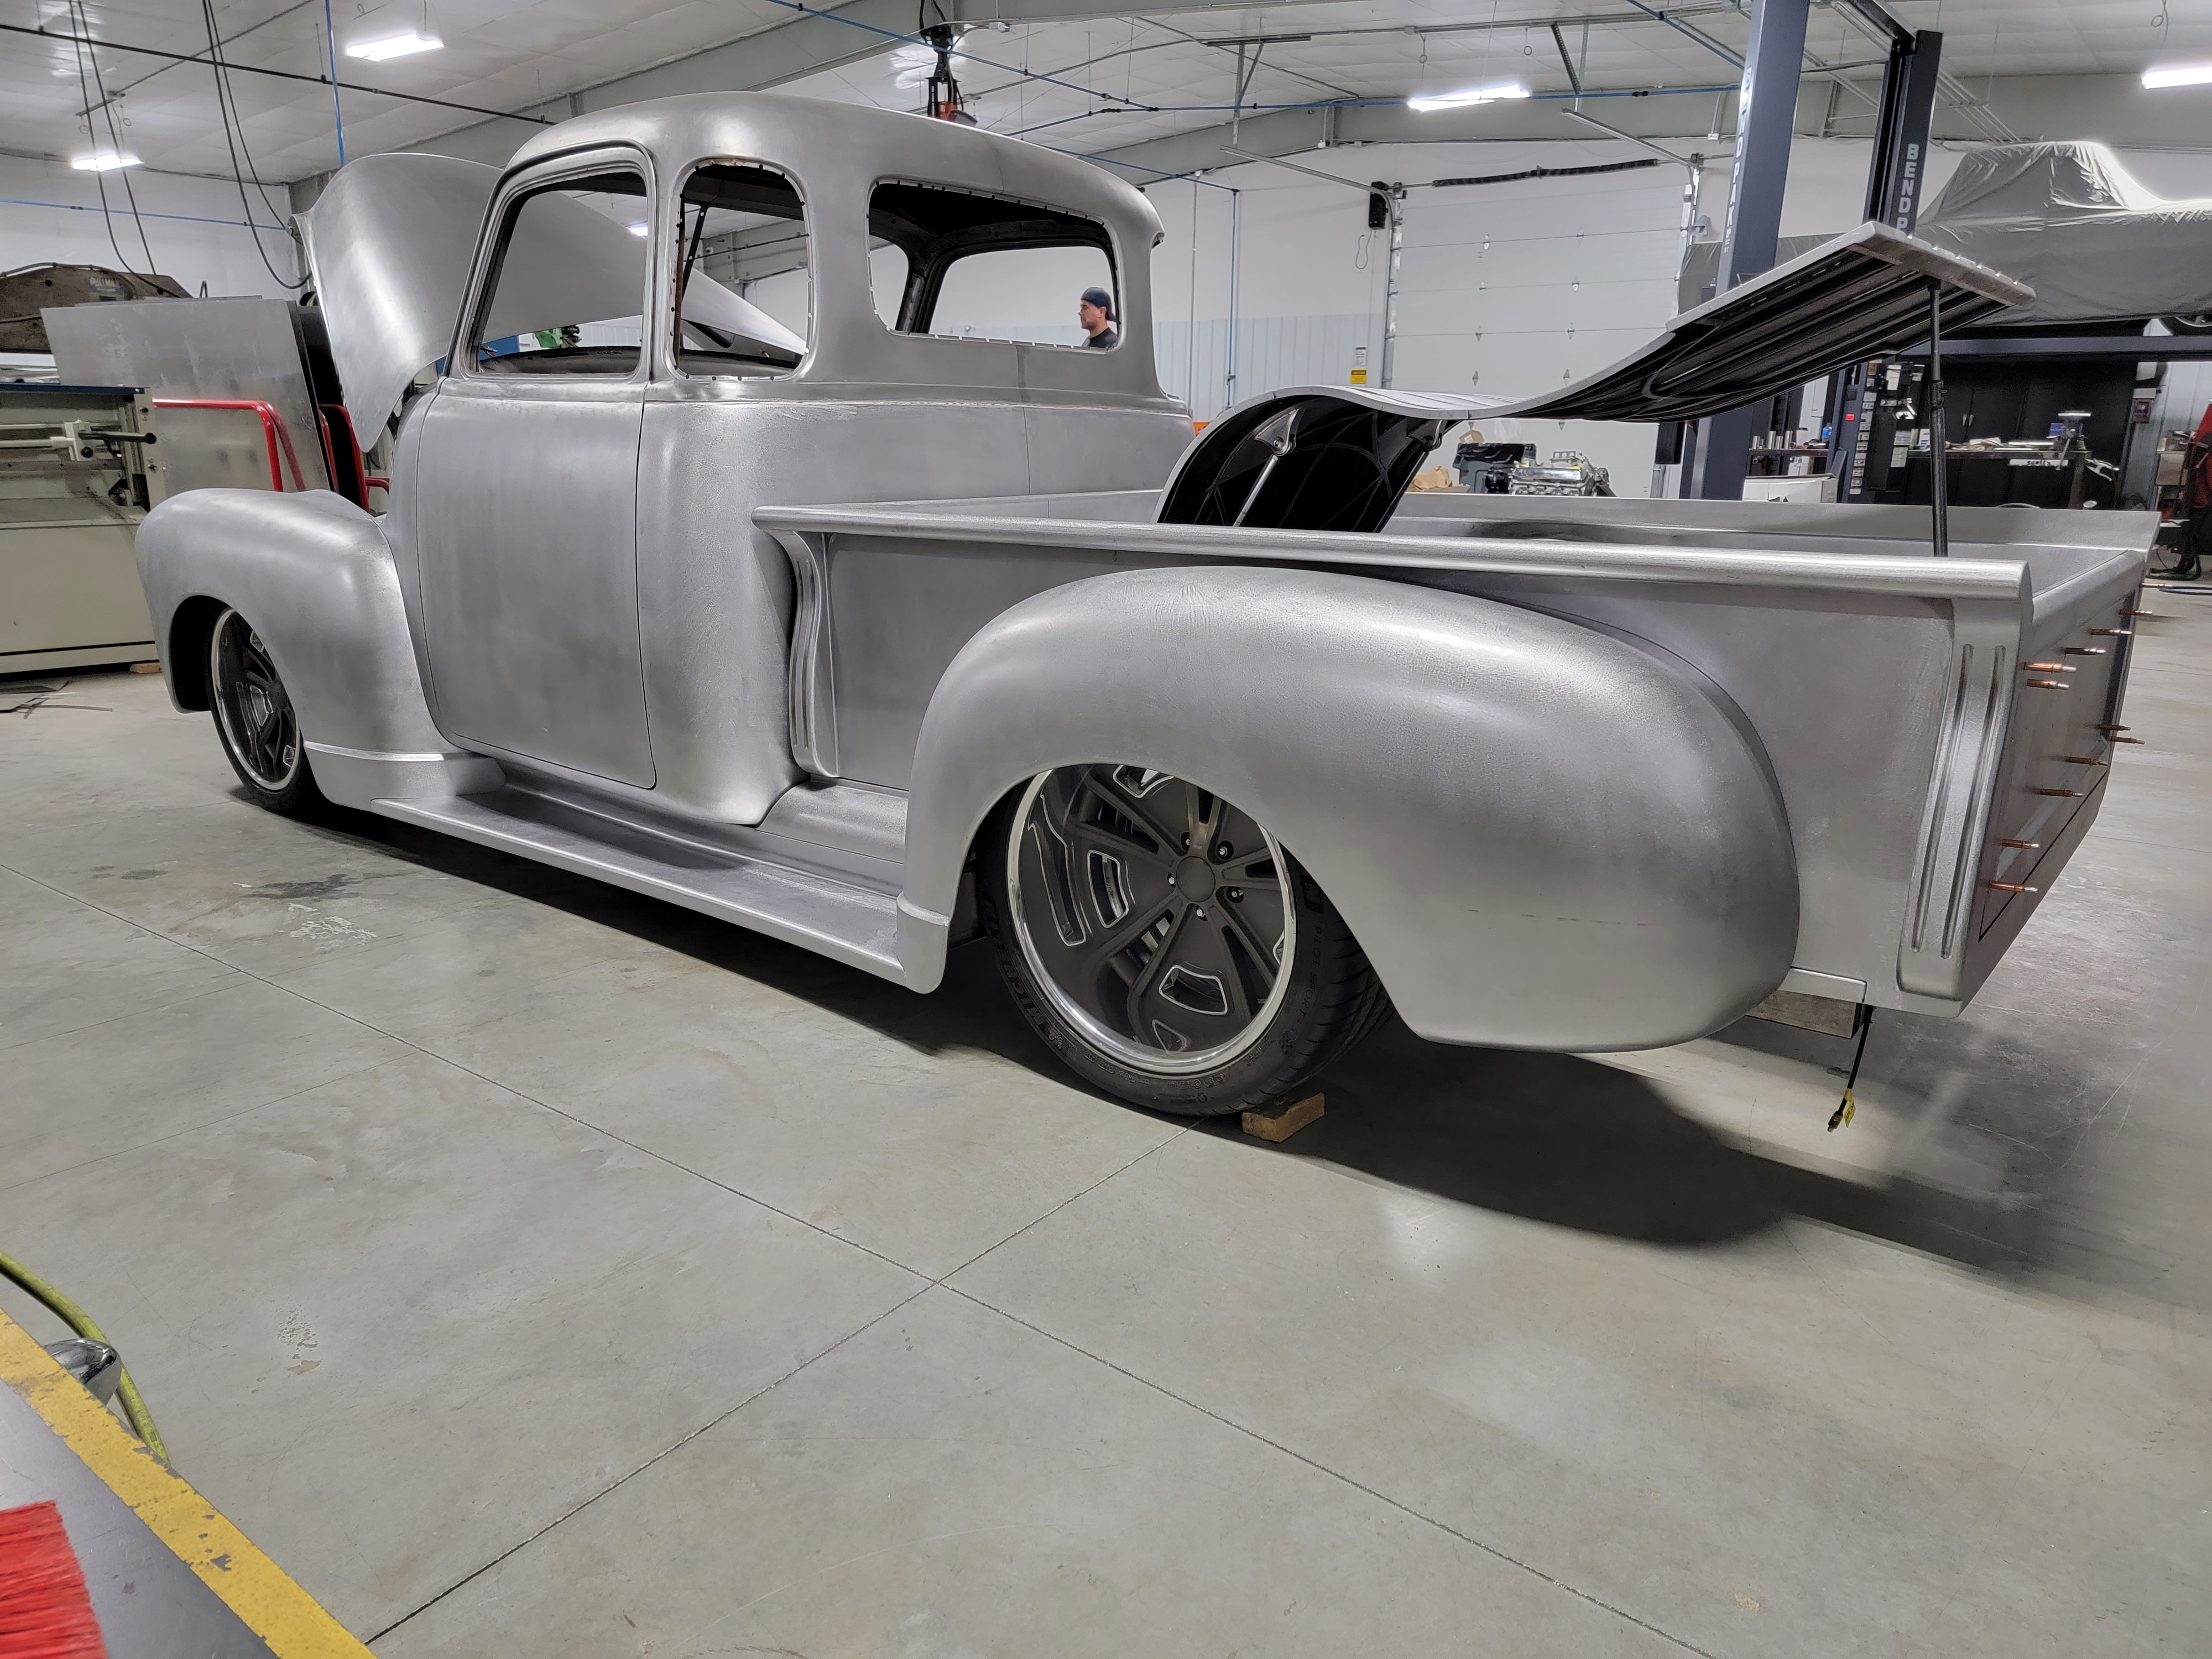 scotts-hotrods-51-chevy-project-truck-2597